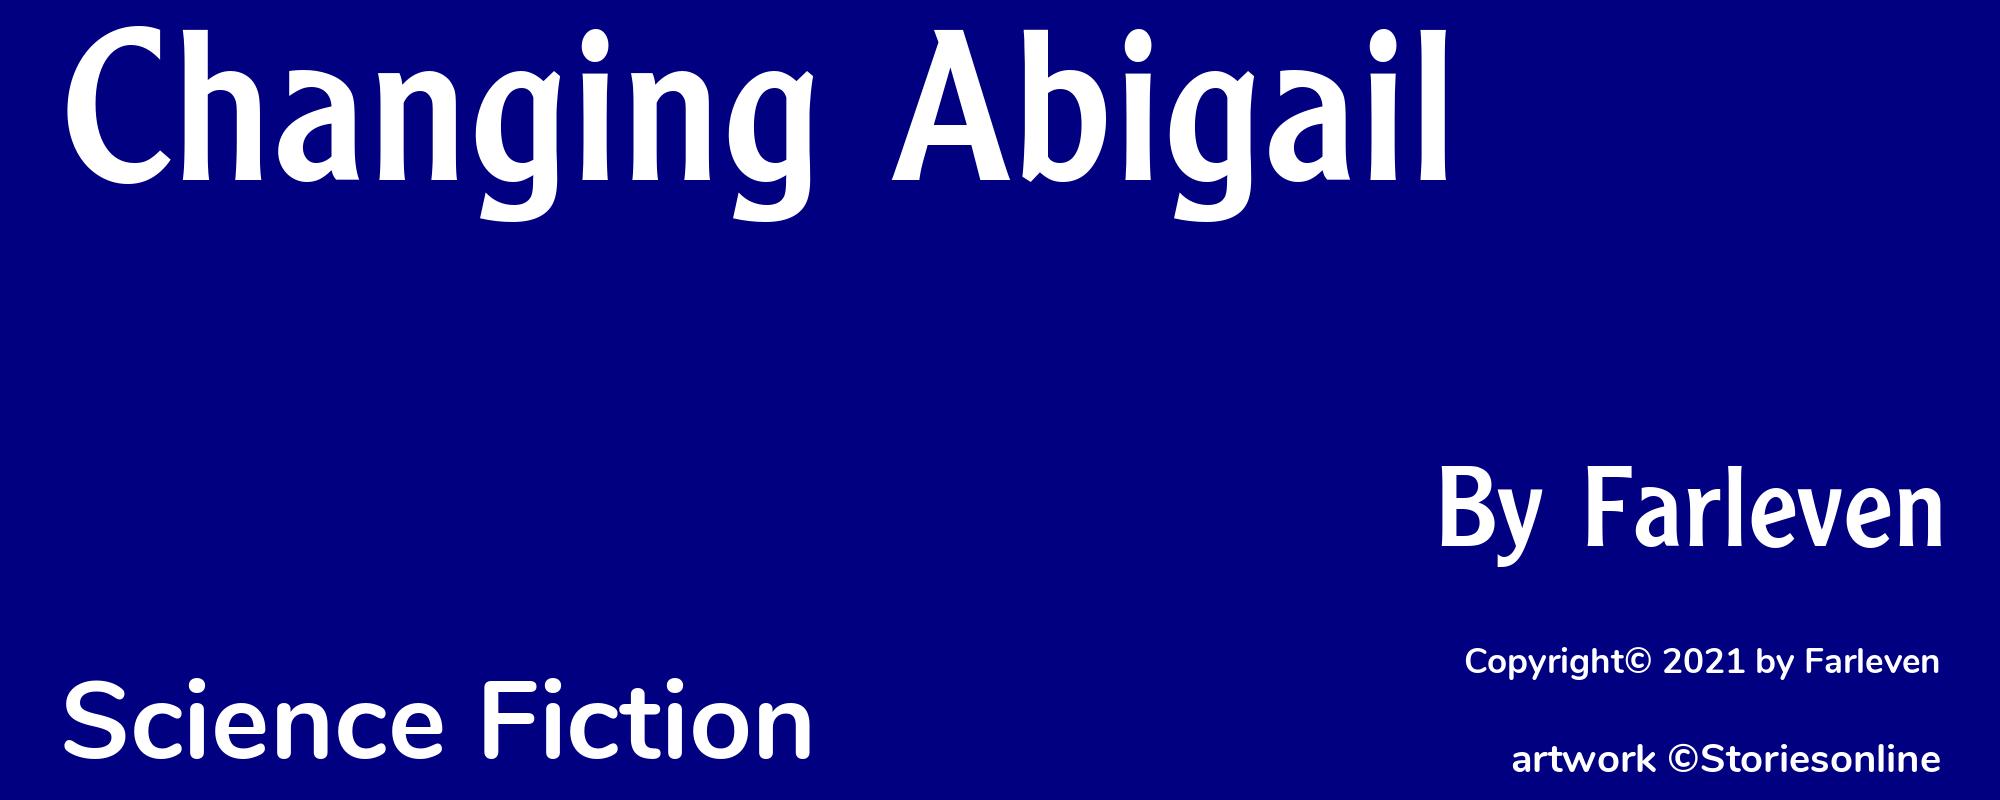 Changing Abigail - Cover